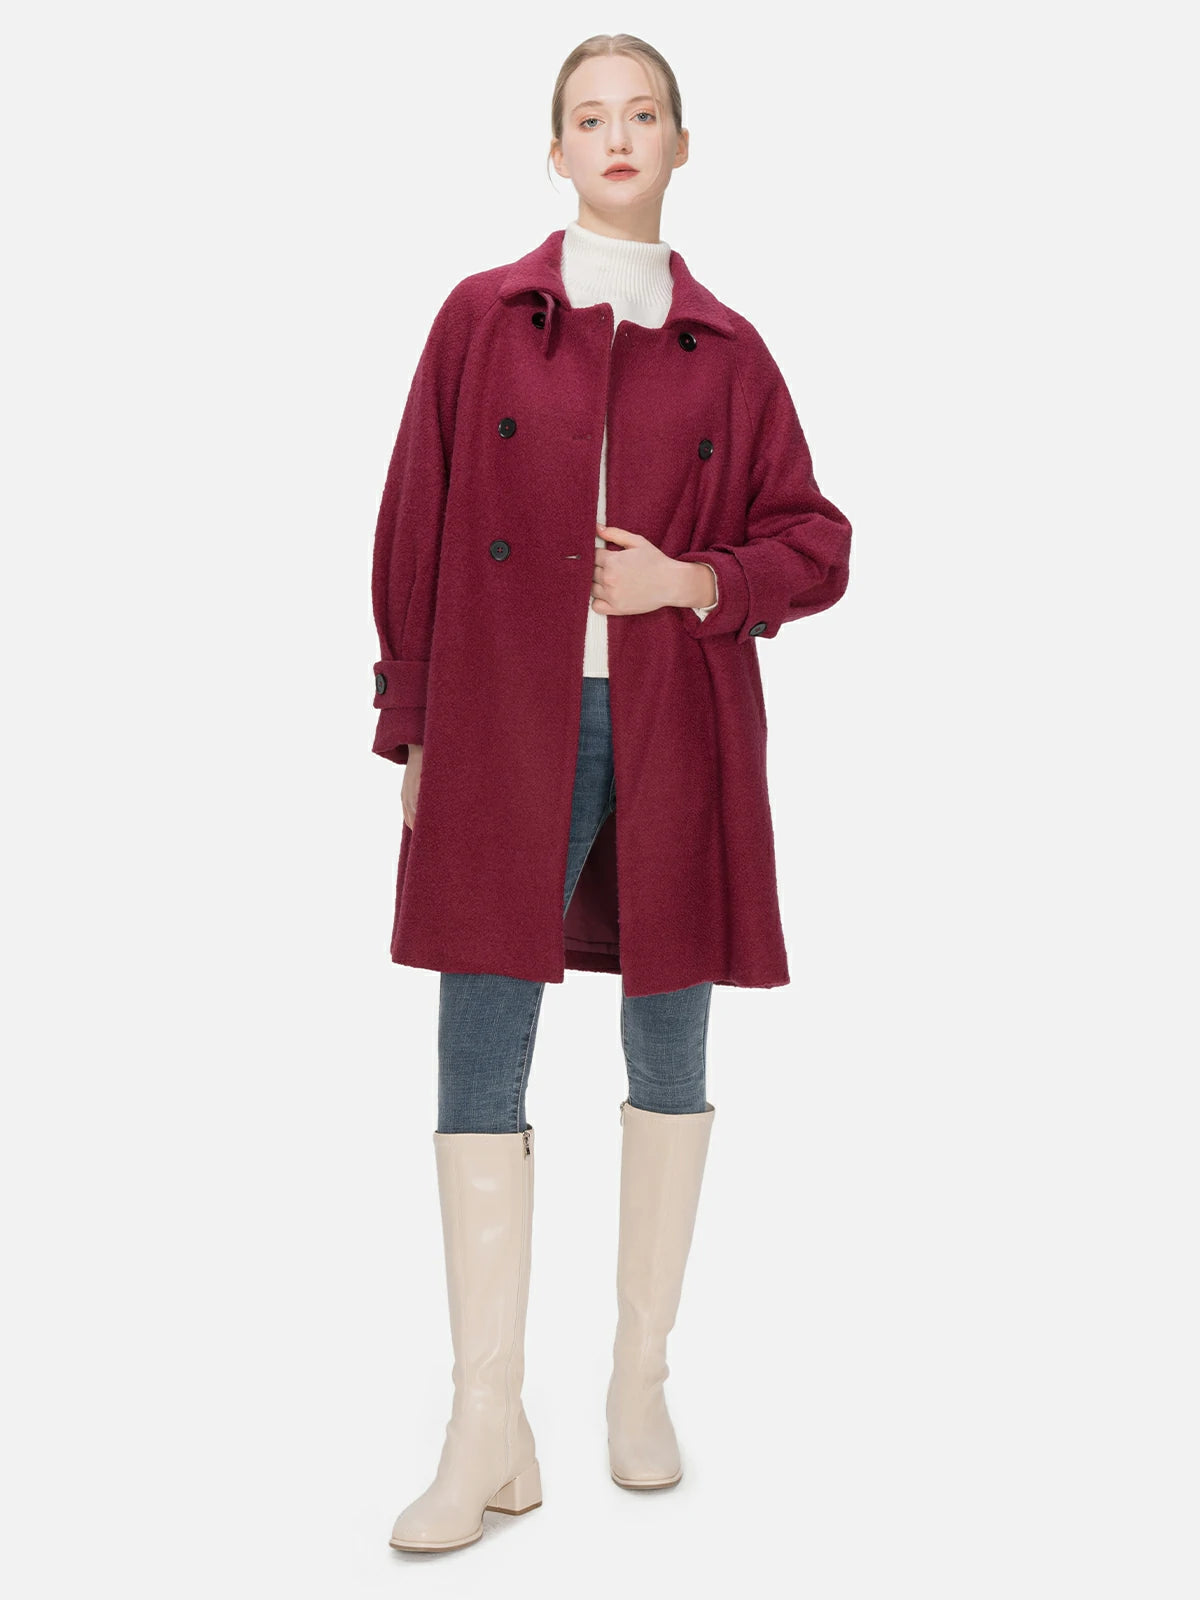 Elevate your winter wardrobe with this deep magenta wool coat, featuring stand collar and lapel options, a double-breasted design, and an elegant silhouette.